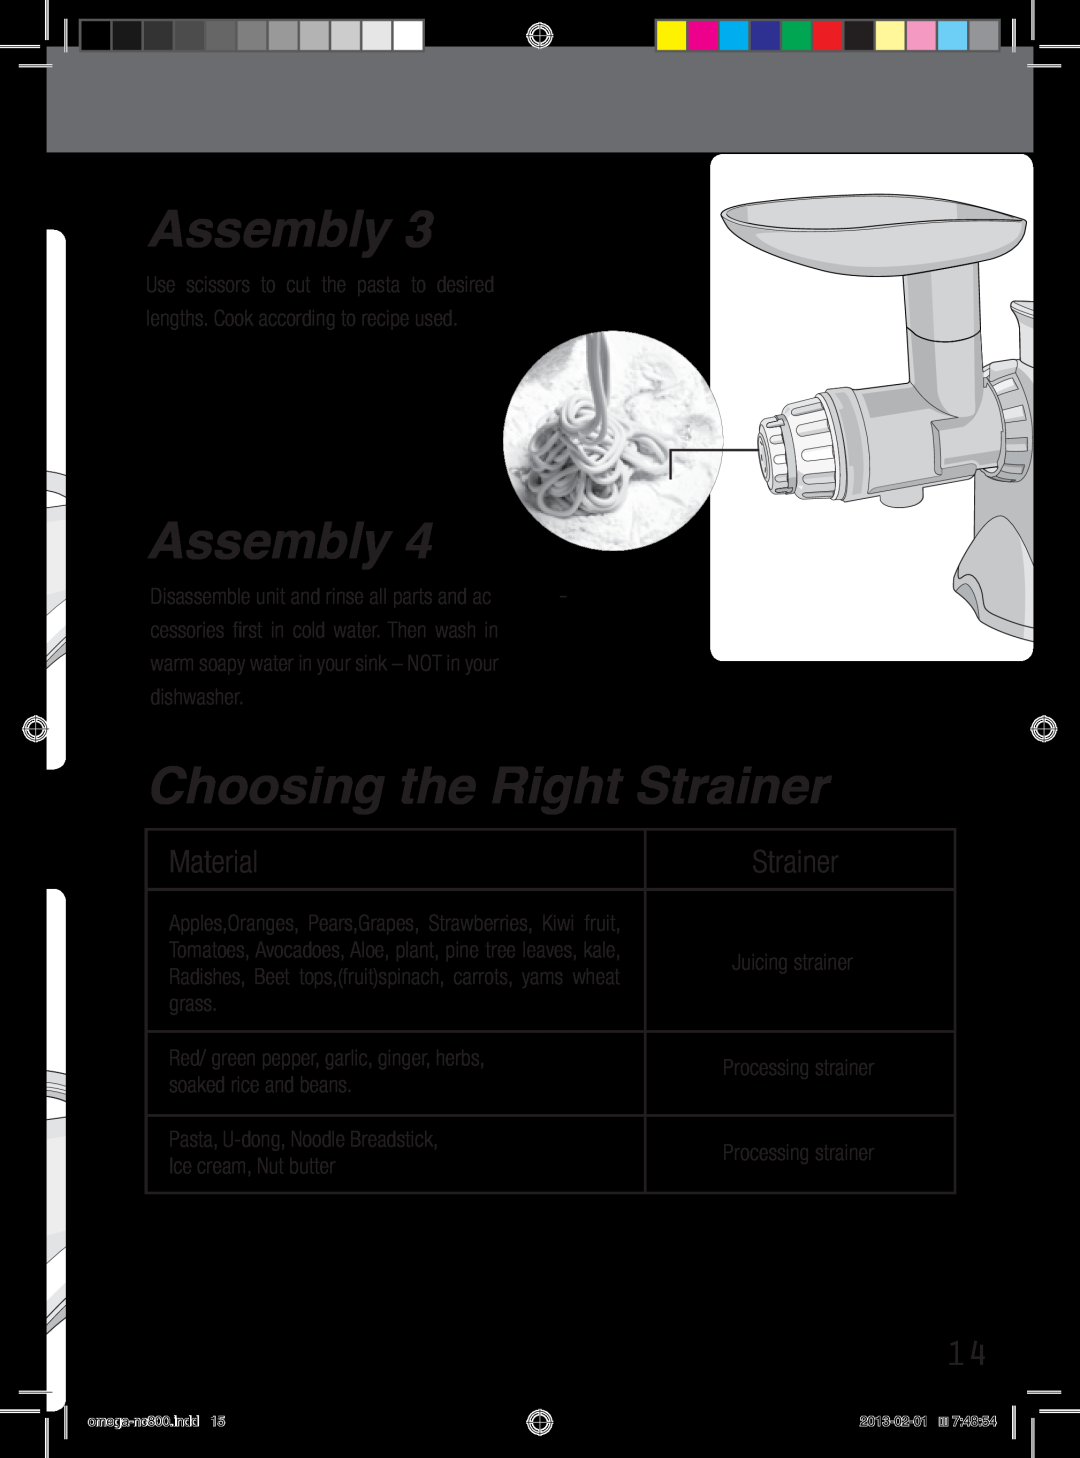 Omega NC900, NC800 instruction manual Choosing the Right Strainer, Assembly, Material 